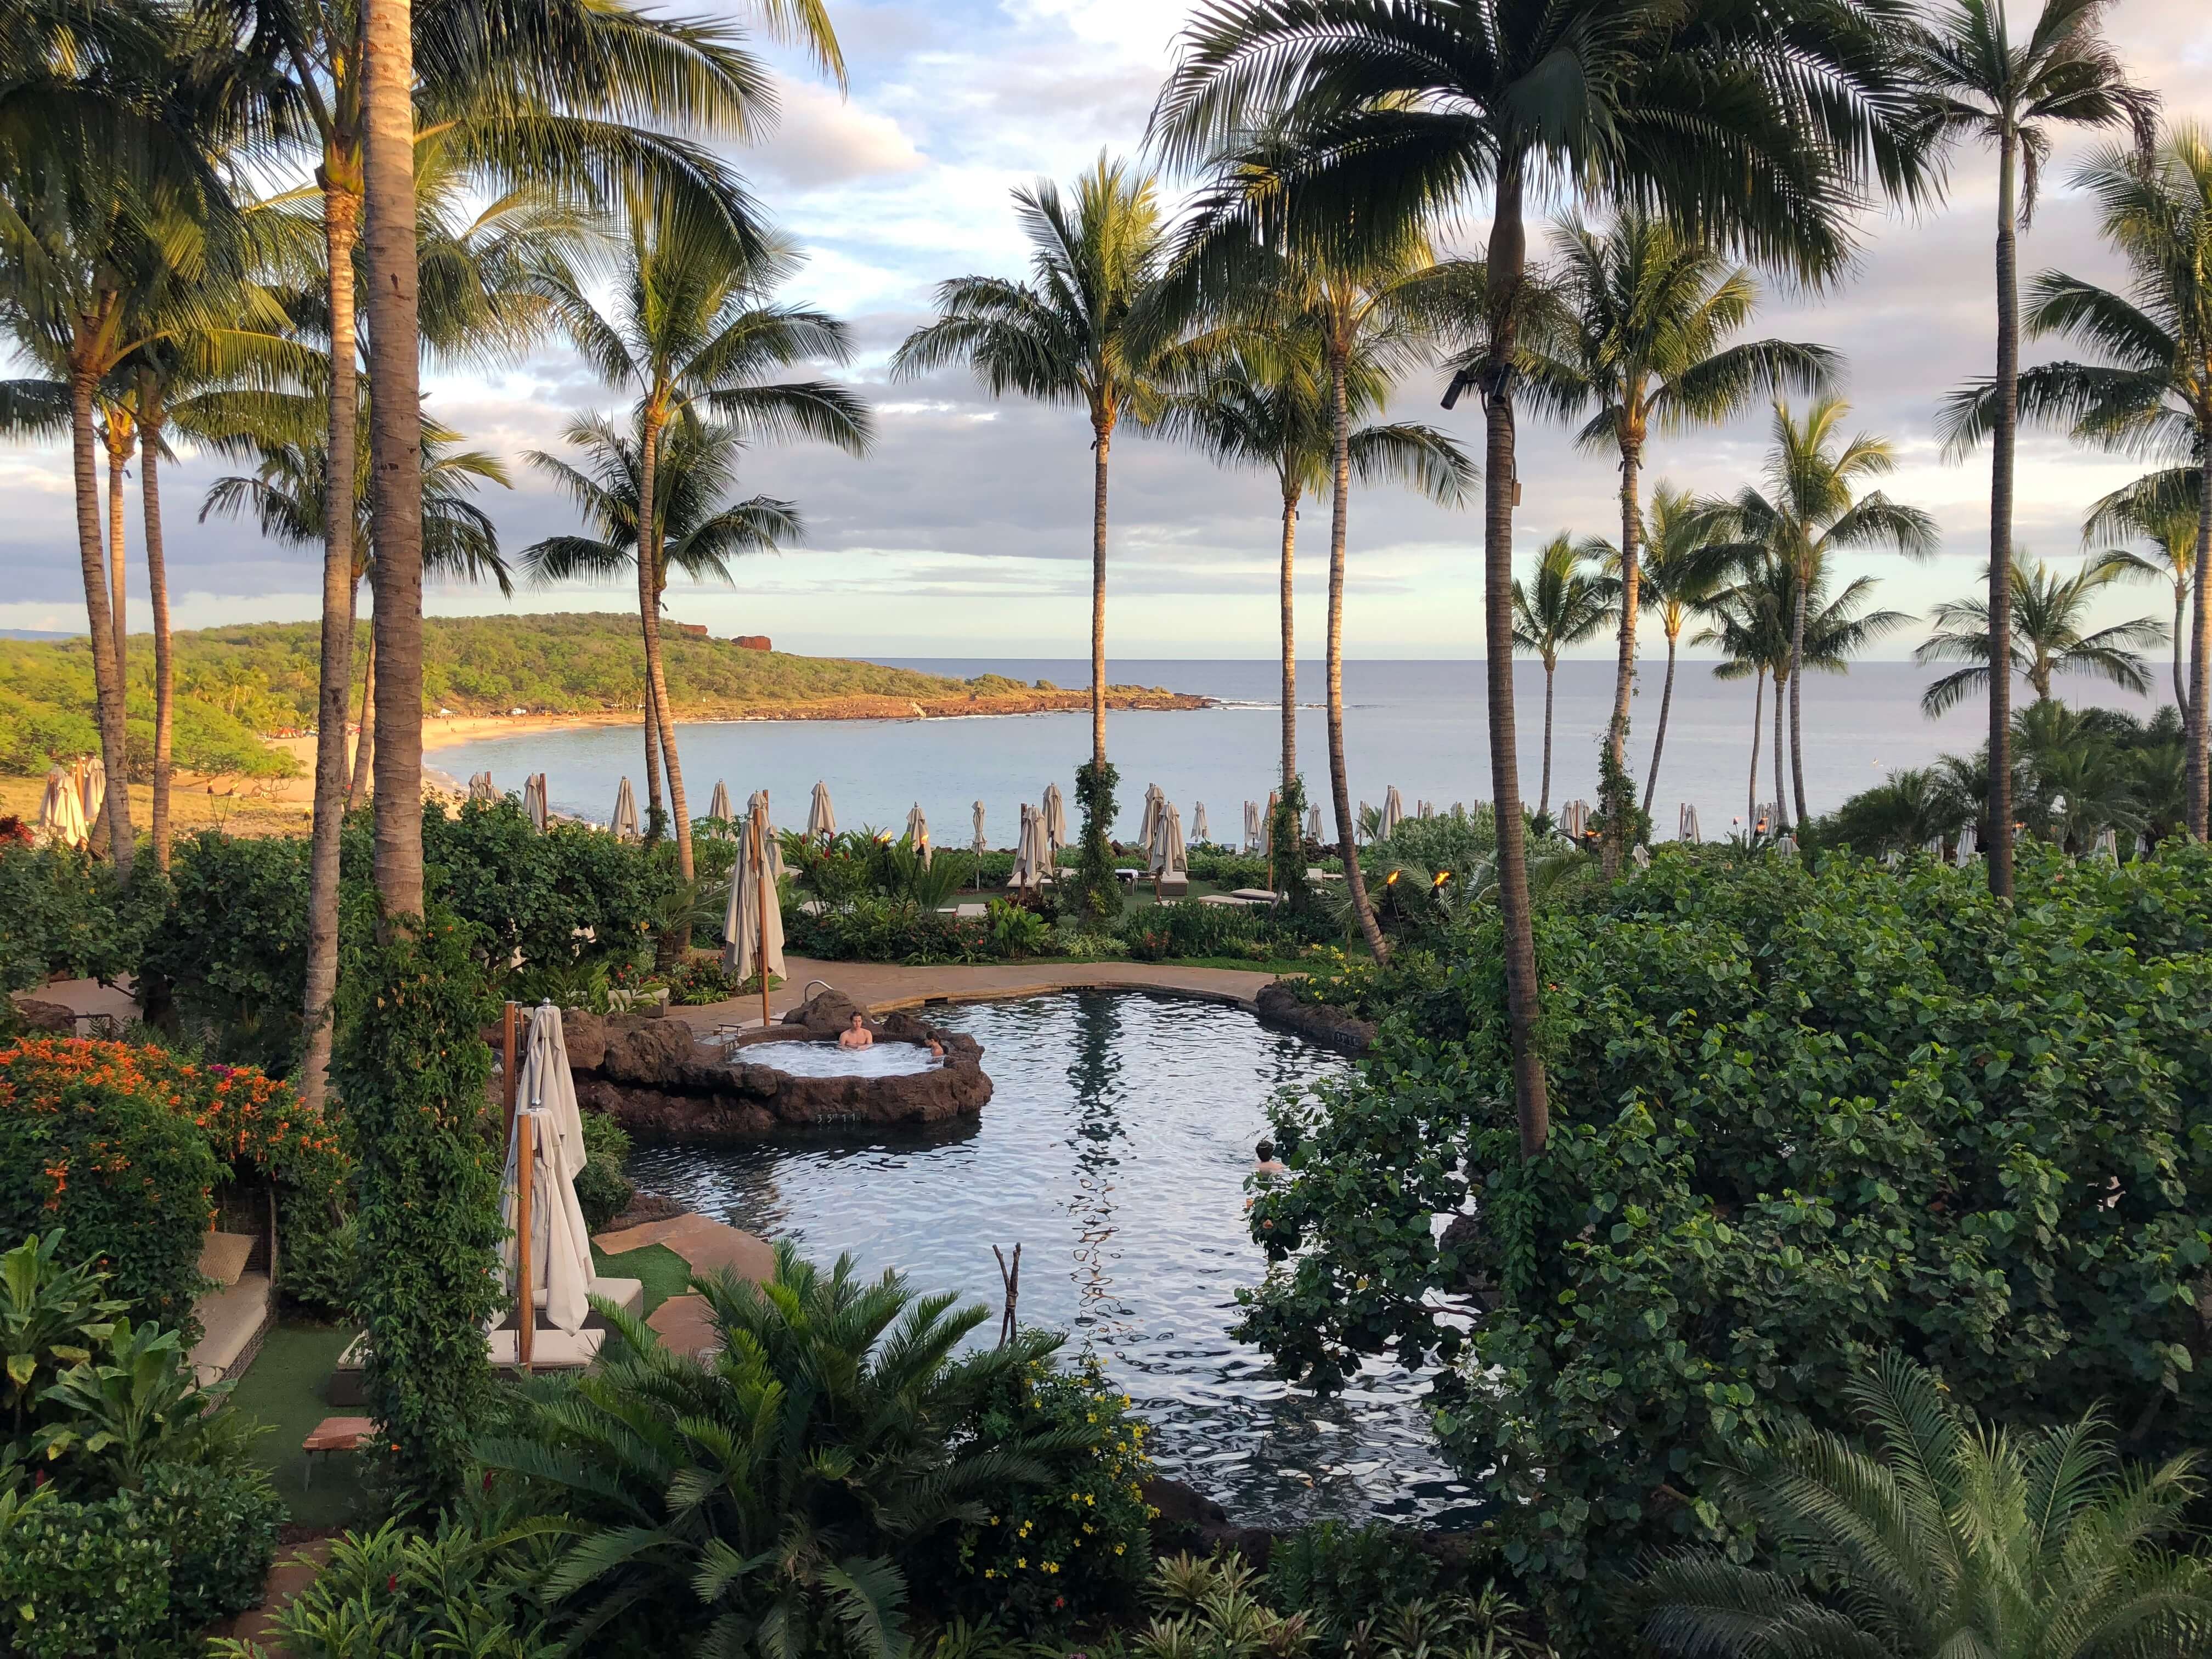 Four Seasons Lanai: 11 Ways to Have the Best Stay